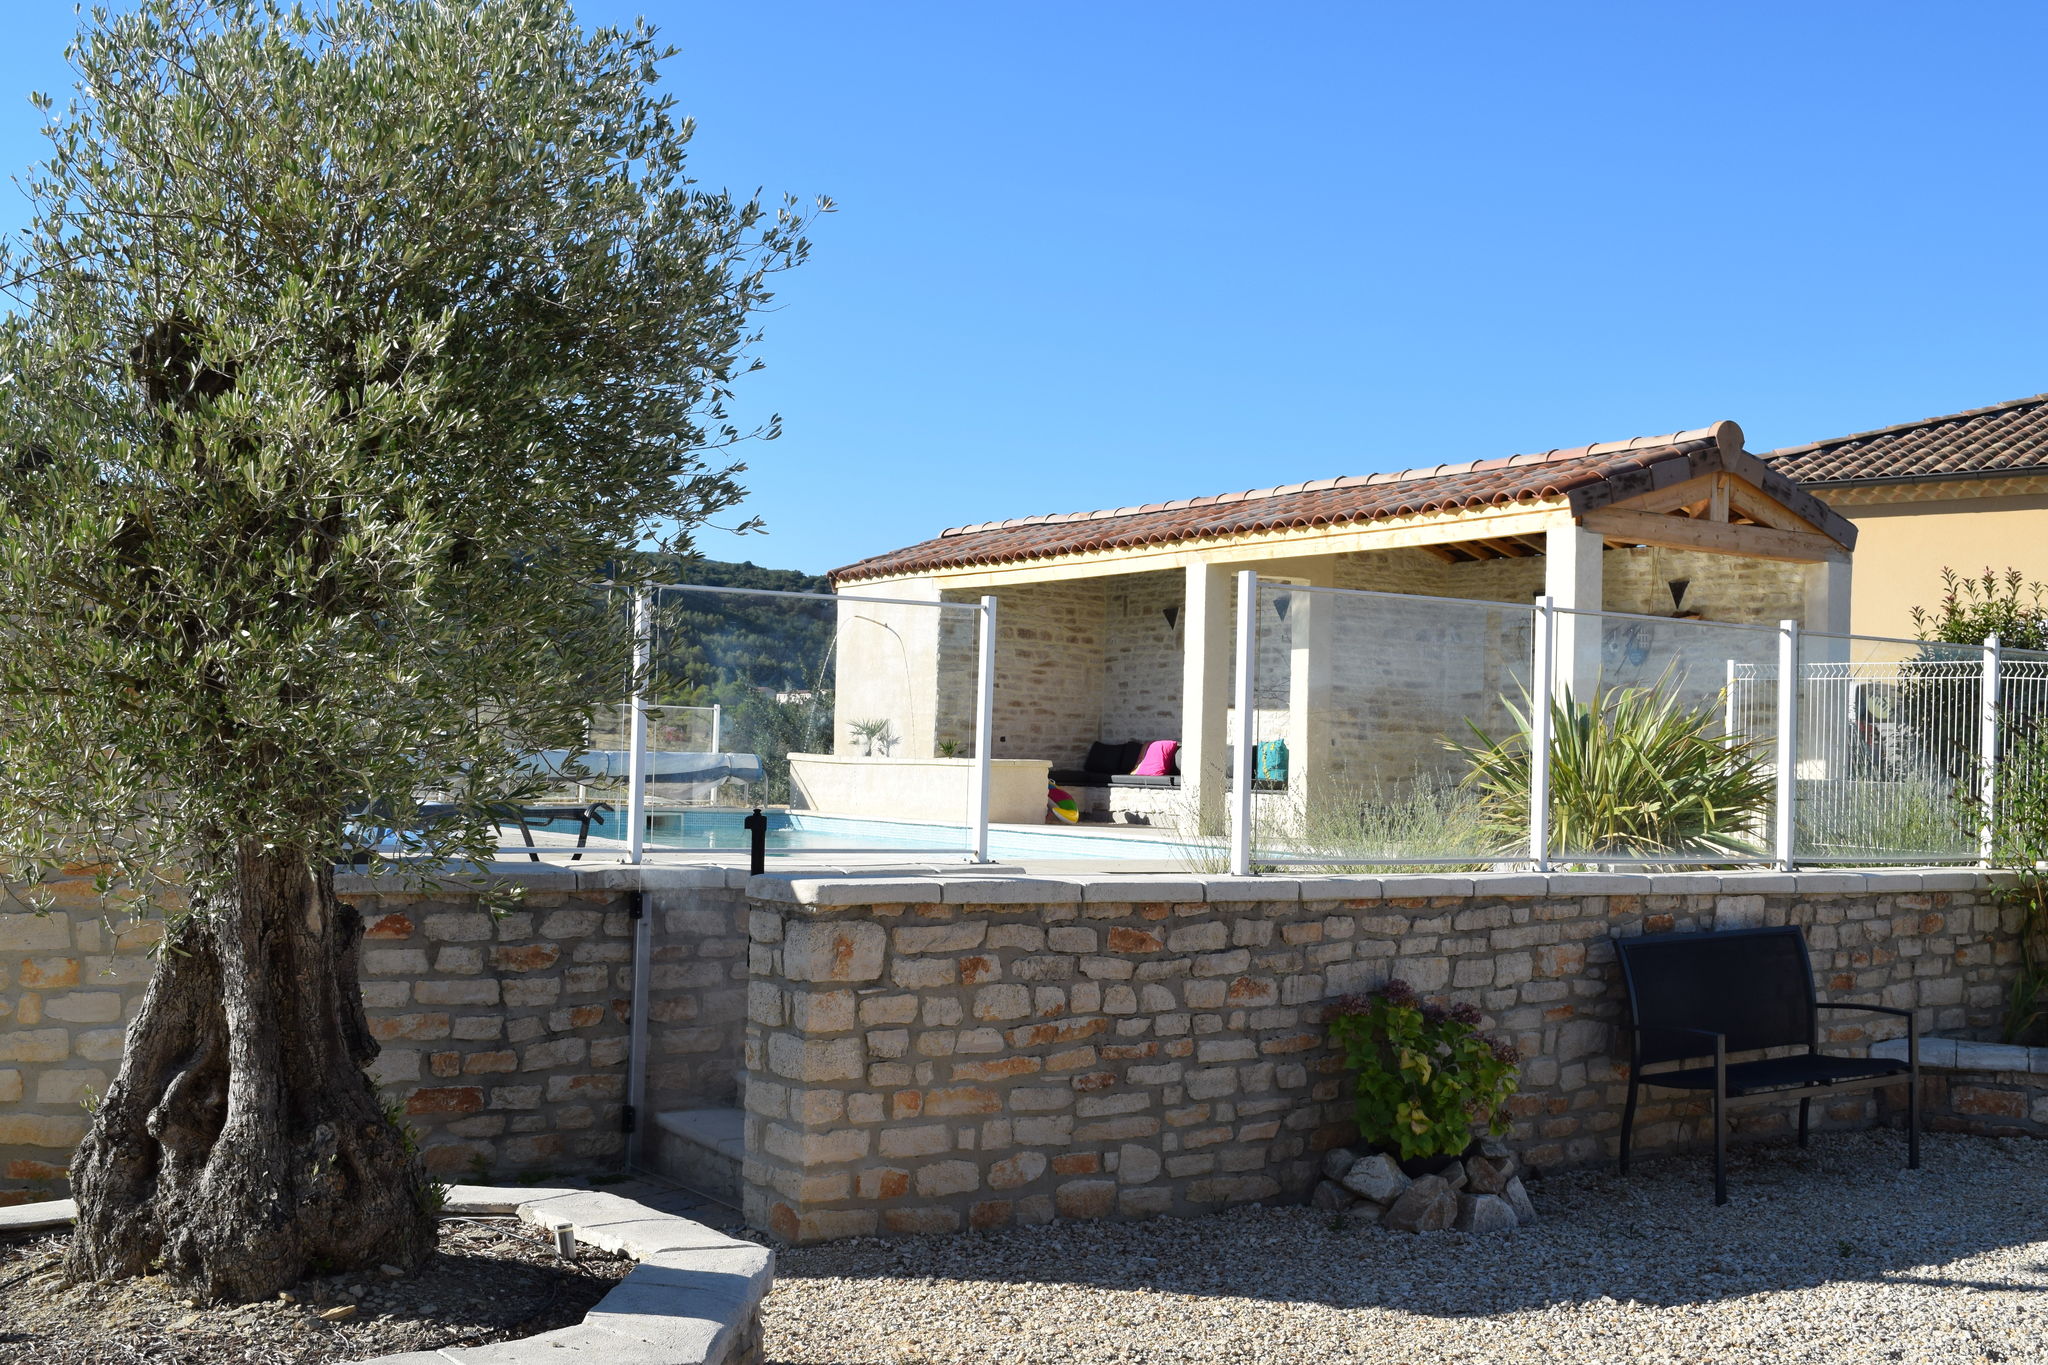 Tasteful holiday home with annexe in a beautiful location with private pool